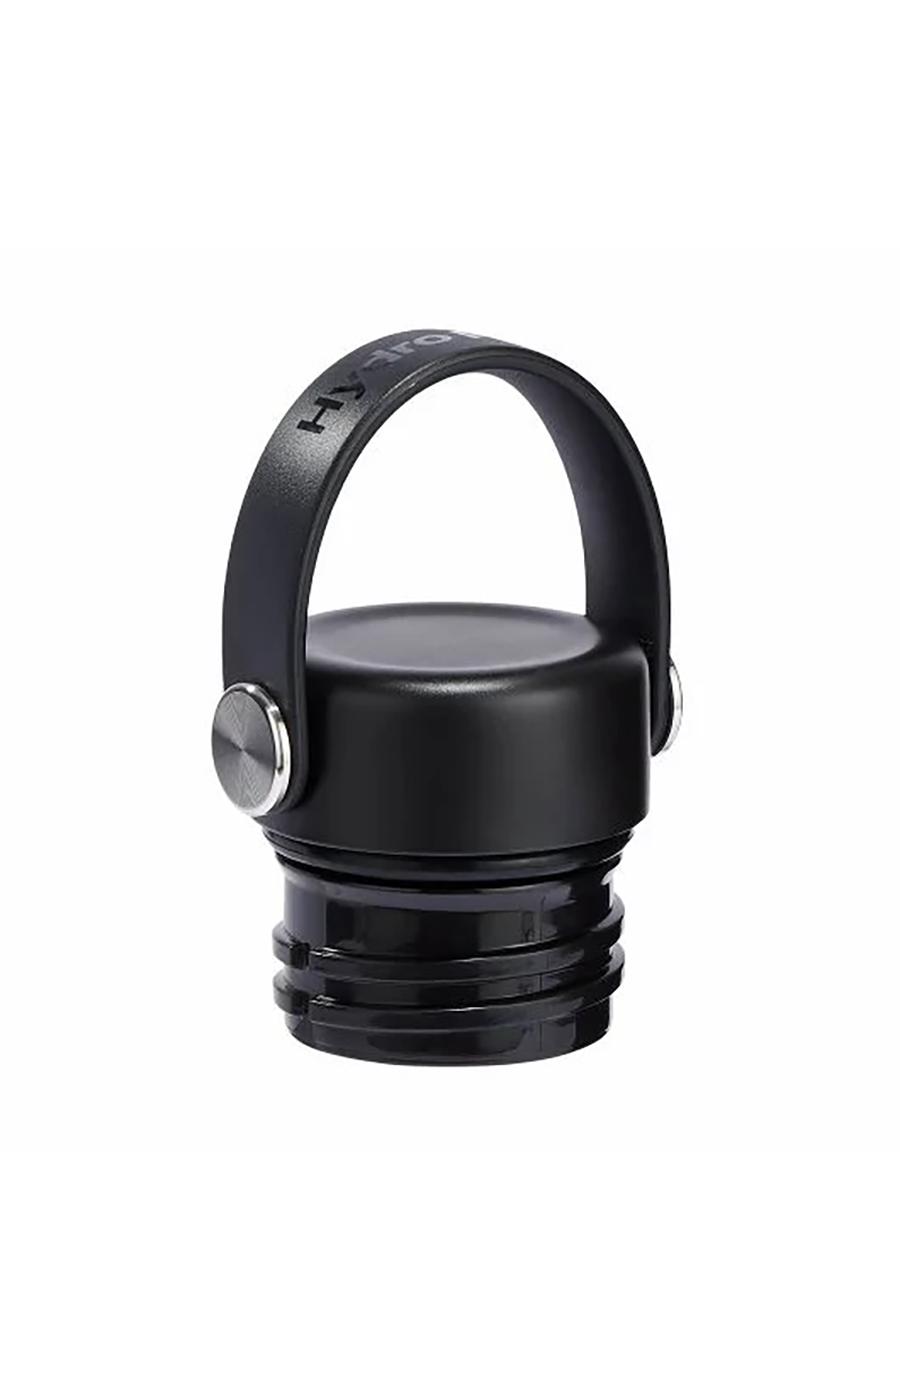 Hydro Flask Standard Mouth Water Bottle with Flex Cap - Black; image 2 of 3